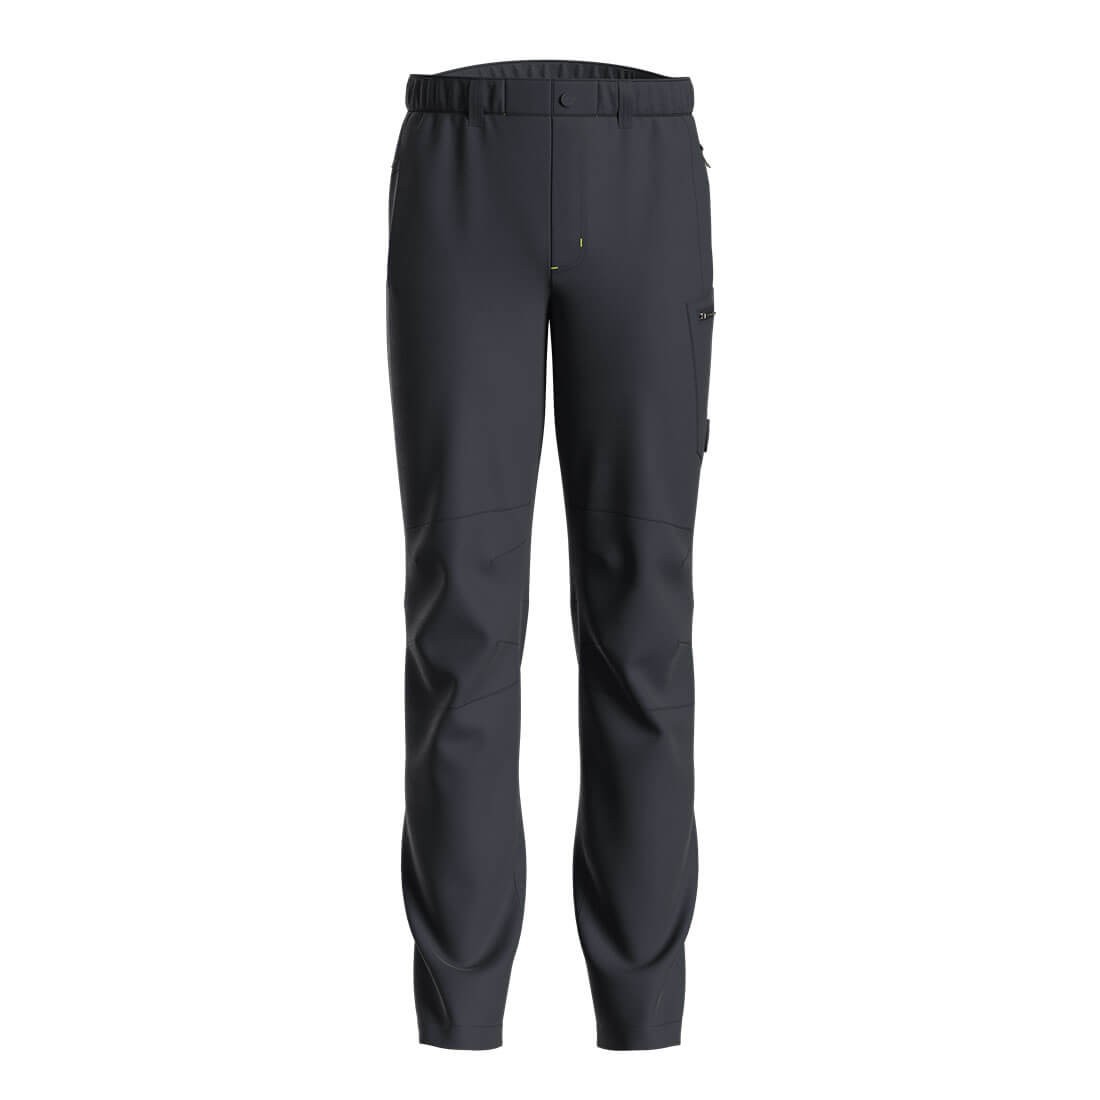 FUOCO - Man outdoor pant